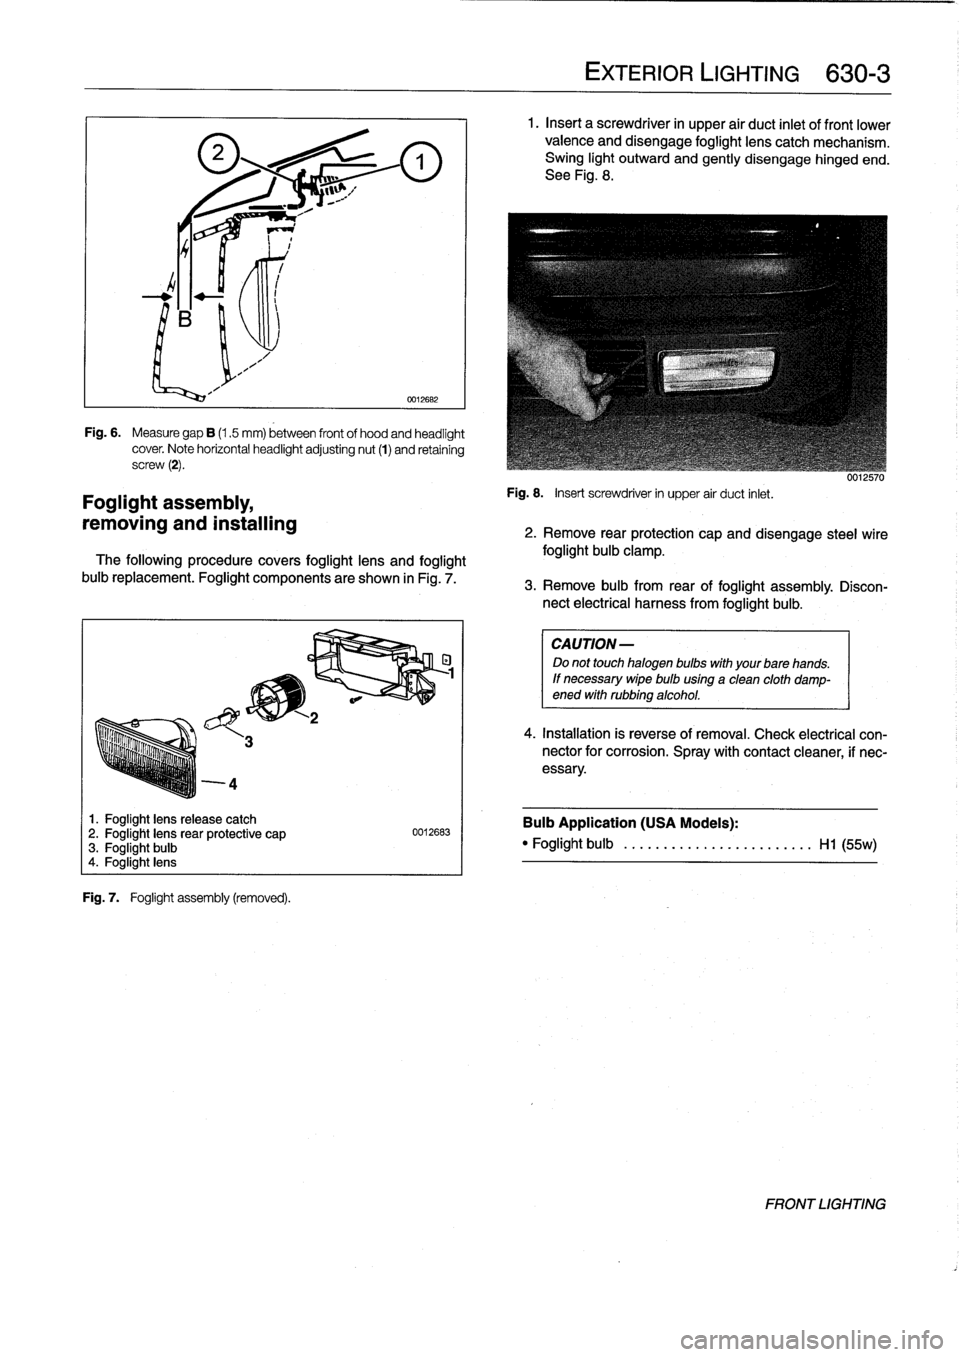 BMW 318i 1997 E36 Workshop Manual 4

Foglight
assembly,

removing
and
installing

1
.
Foglight
lens
release
catch
2
.
Foglight
lensrear
protective
cap
3
.
Foglight
bulb
4
.
Foglight
lens

Fig
.
7
.

	

Foglight
assembly
(removed)
.

0